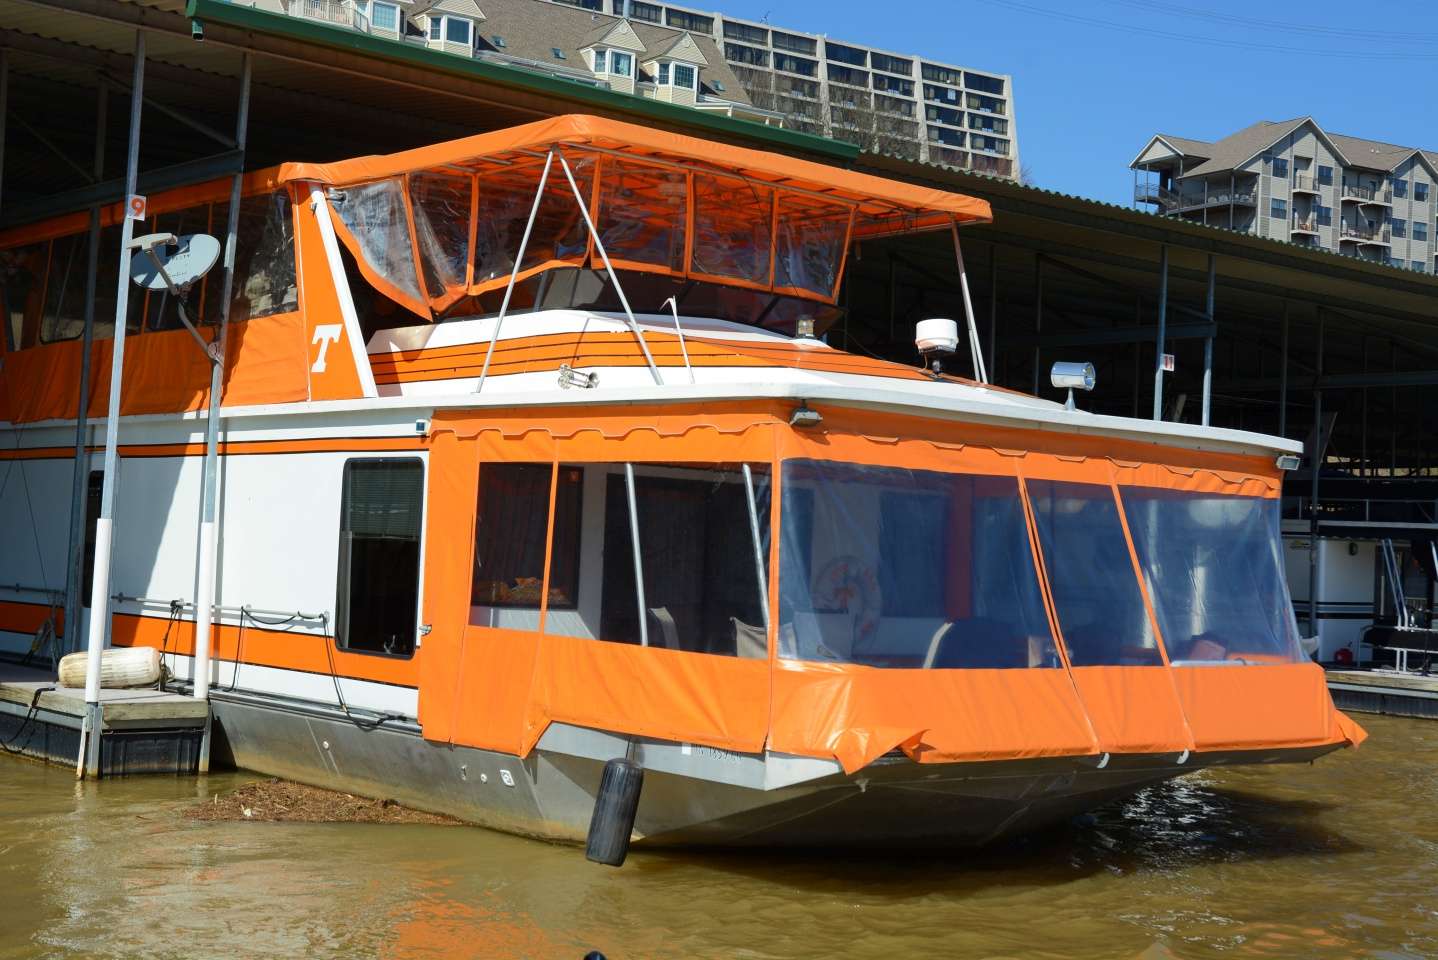 On any given home game Saturday, the Vol Navy is a fleet of boats that on average number from 150 to 200 boats, mostly houseboats like this, yachts and runabouts. The Vol Navy is part of the unique atmosphere of the football games. 
